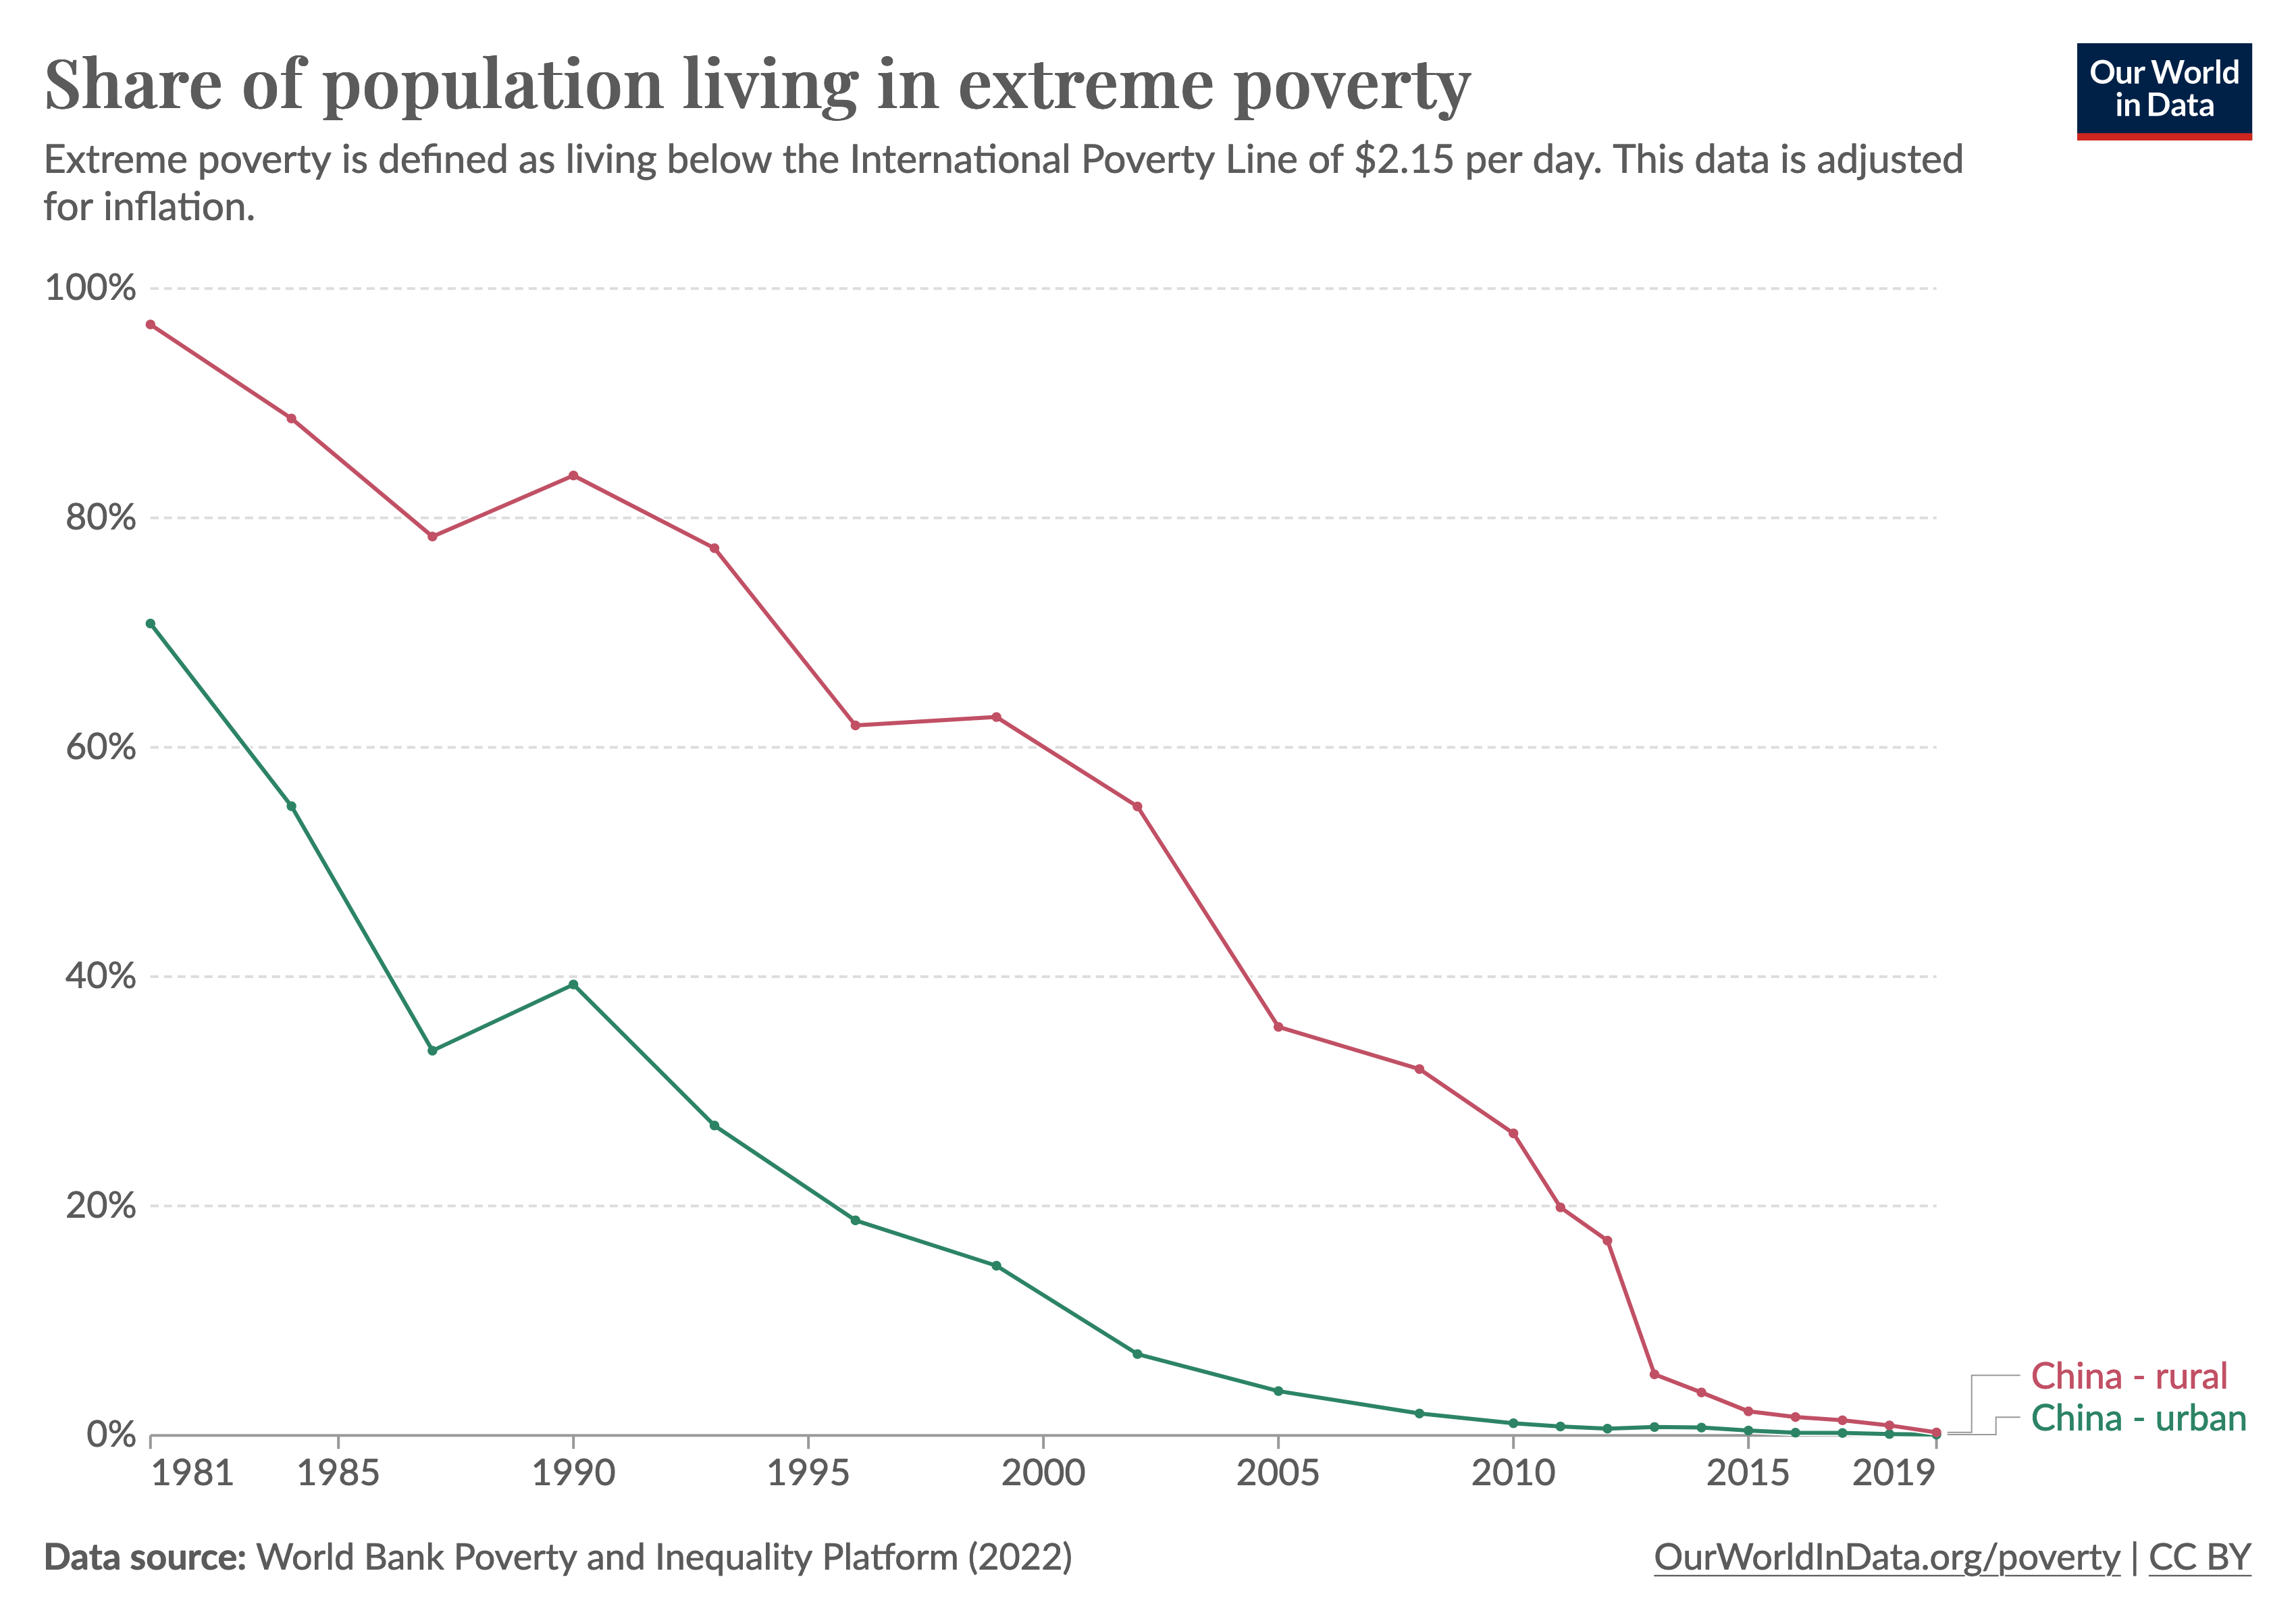 Extreme poverty in China has been almost eliminated — first in rural, then in urban regions